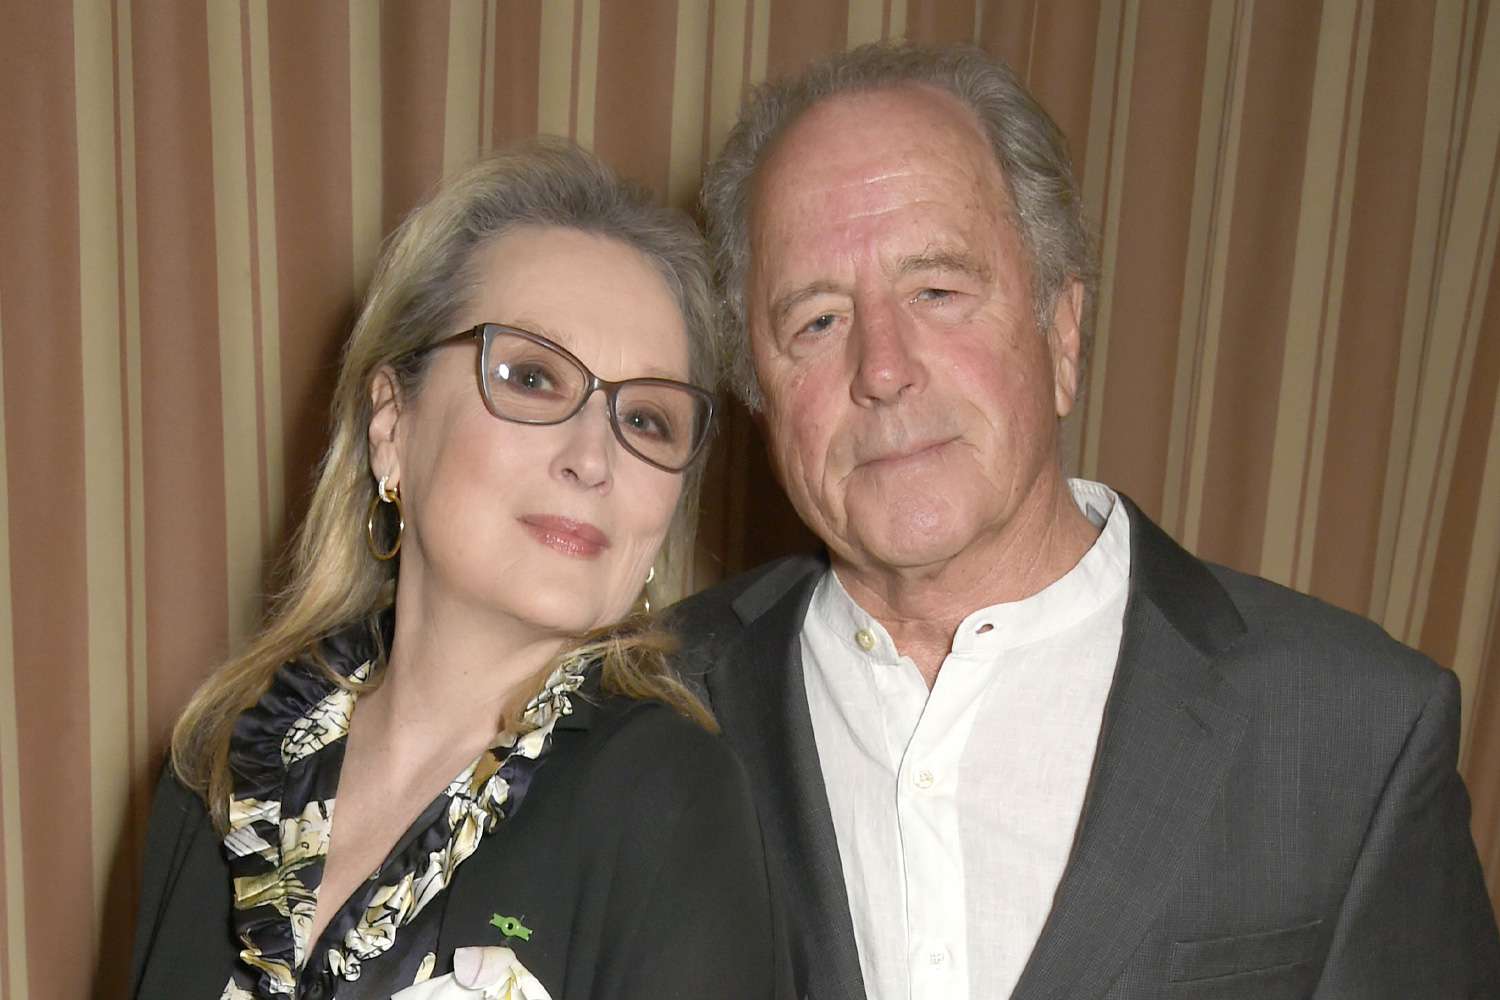 meryl-streep-and-husband-don-gummer-living-separate-lives-for-years-reports